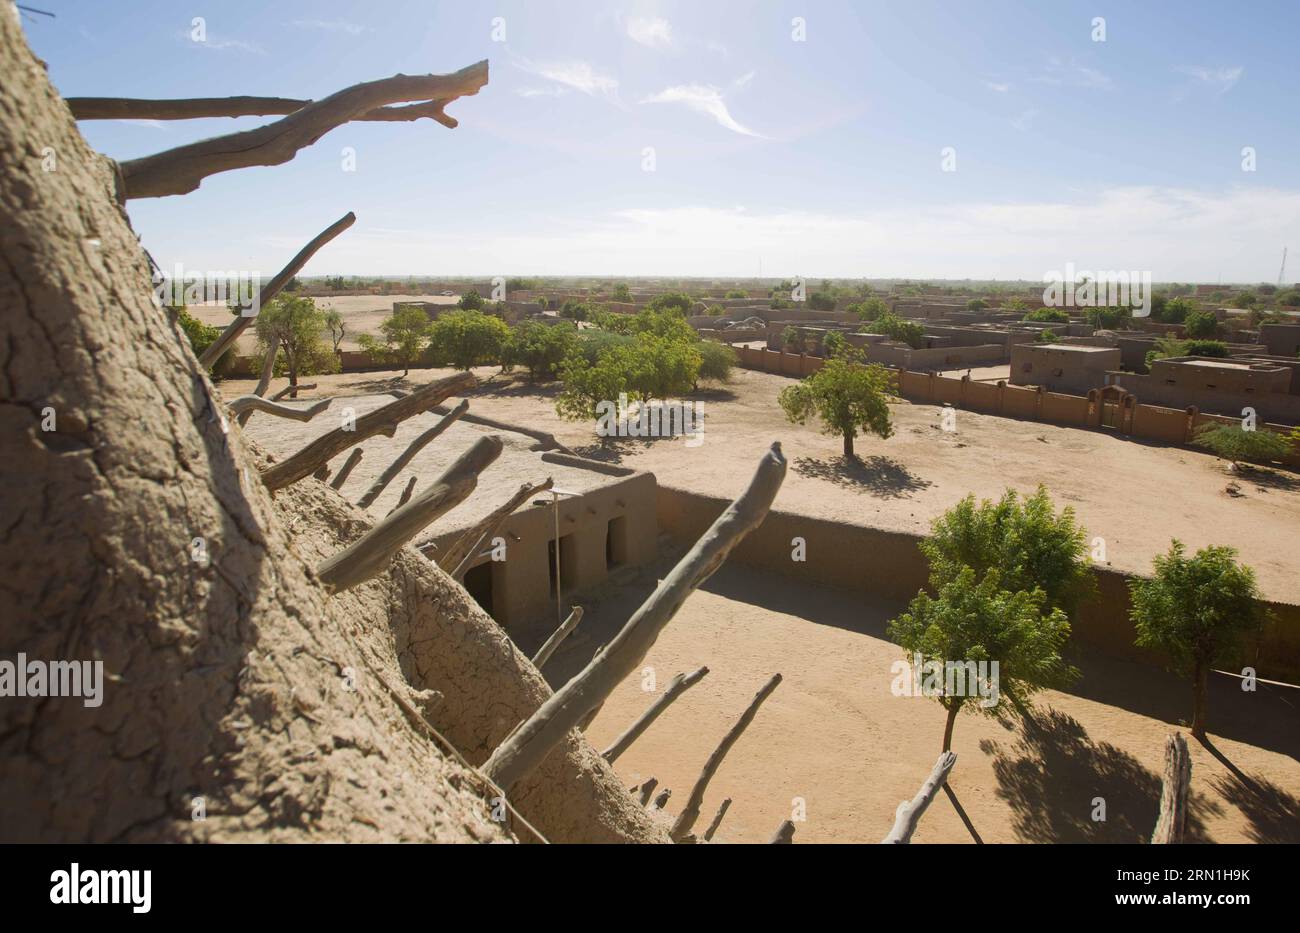 (150102) -- GAO, Jan. 2, 2015 -- Photo taken on Dec. 31, 2014 shows the view of the city of Gao from the Tomb of Askia, in Gao, northern Mali. Built in the late fifteenth century, Askia is believed to be the burial place of Askia Mohammad I, one of the Songhai Empire s most prolific emperors. It is designated as a UNESCO World Heritage Site in 2004. ) MALI-GAO-TOMB OF ASKIA LixJing PUBLICATIONxNOTxINxCHN   Gao Jan 2 2015 Photo Taken ON DEC 31 2014 Shows The View of The City of Gao from The Tomb of Askia in Gao Northern Mali built in The Late fifteenth Century Askia IS believed to Be The burial Stock Photo